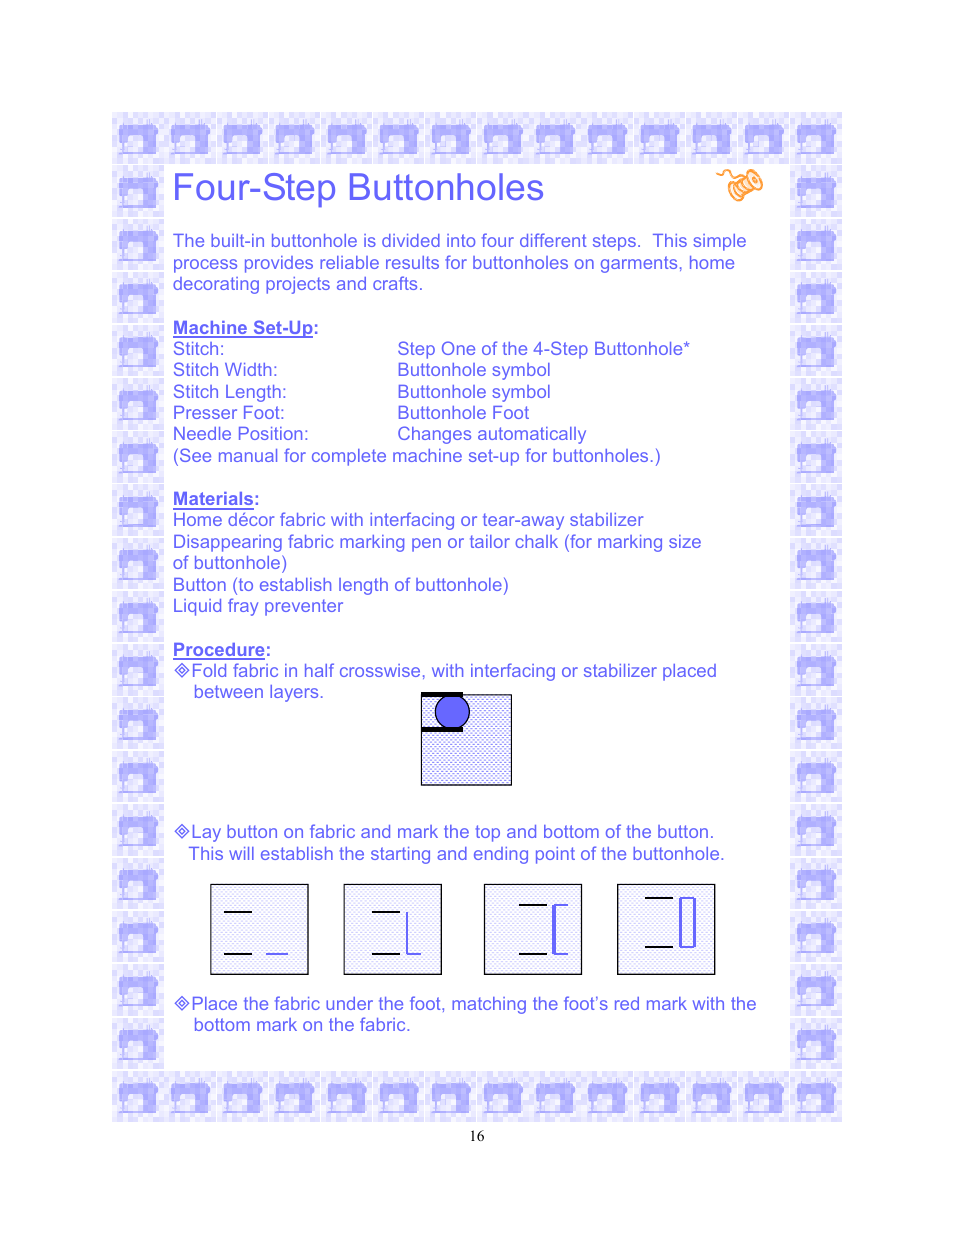 Four-step buttonholes | SINGER 6550-WORKBOOK Scholastic User Manual | Page 20 / 59